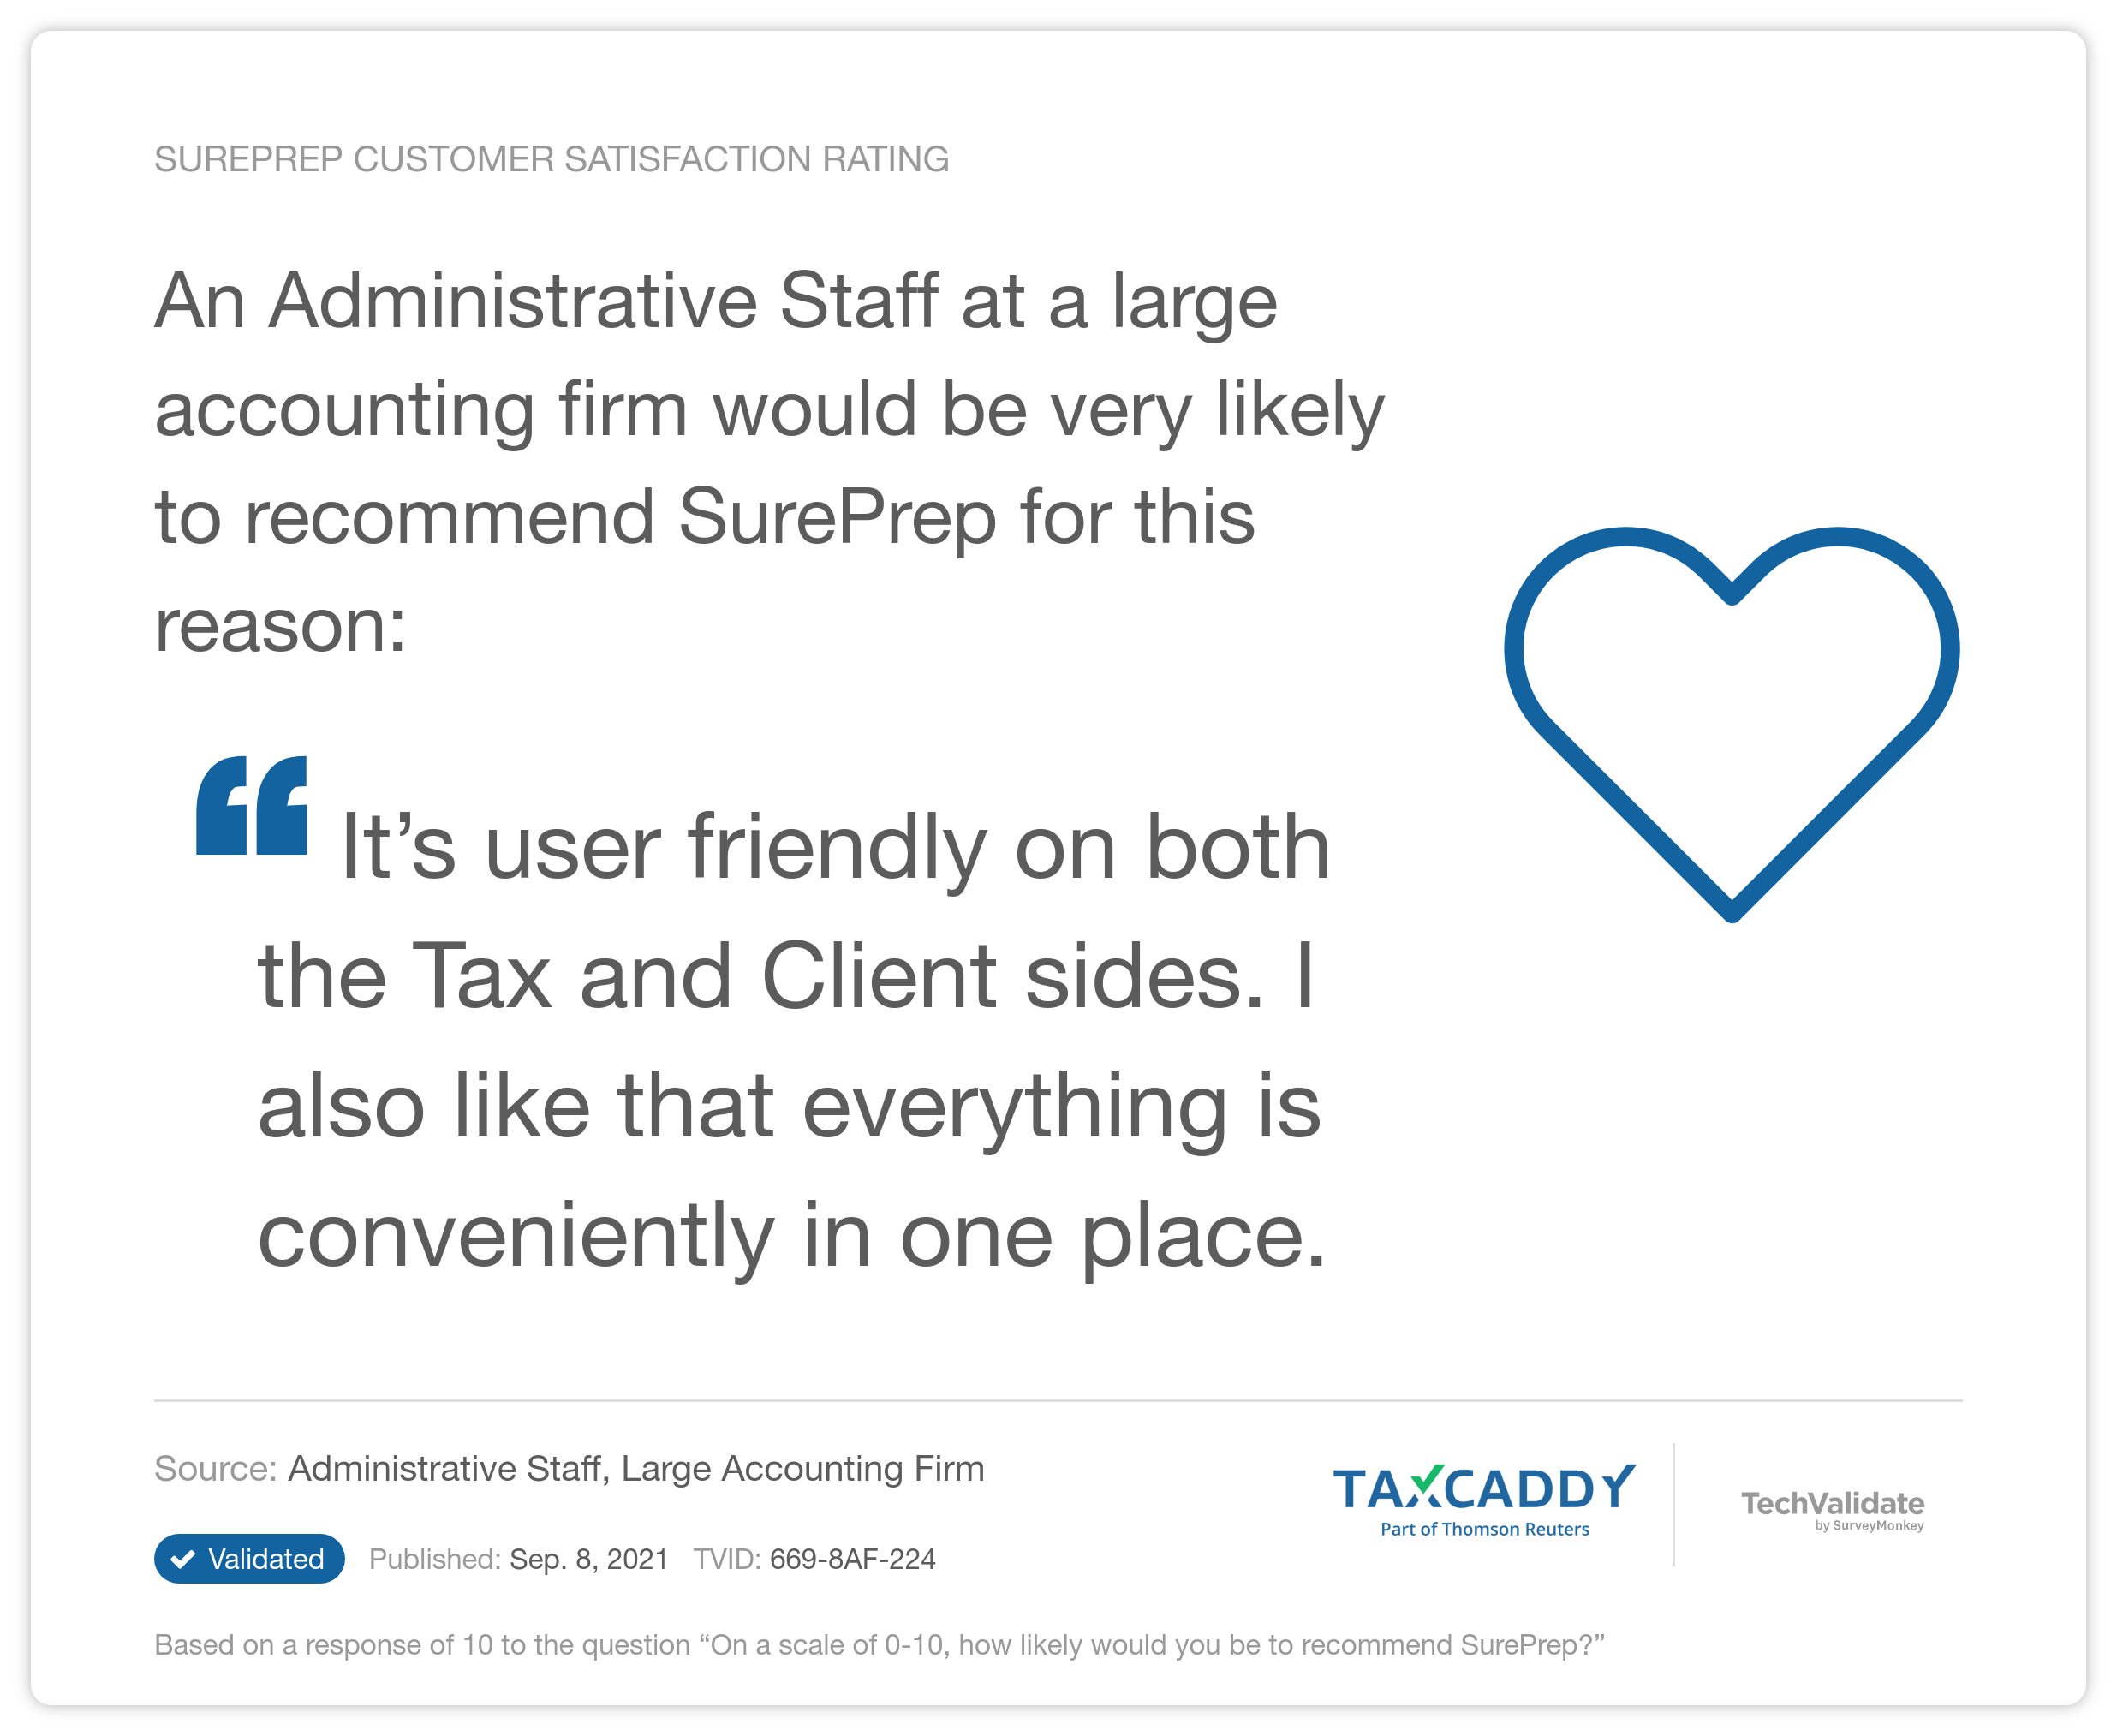 An Administrative Staff at a large accounting firm would be very likely to recommend SurePrep for this reason: "It's user friendly on both the Tax and Client sides. I also like that everything is conveniently in one place.